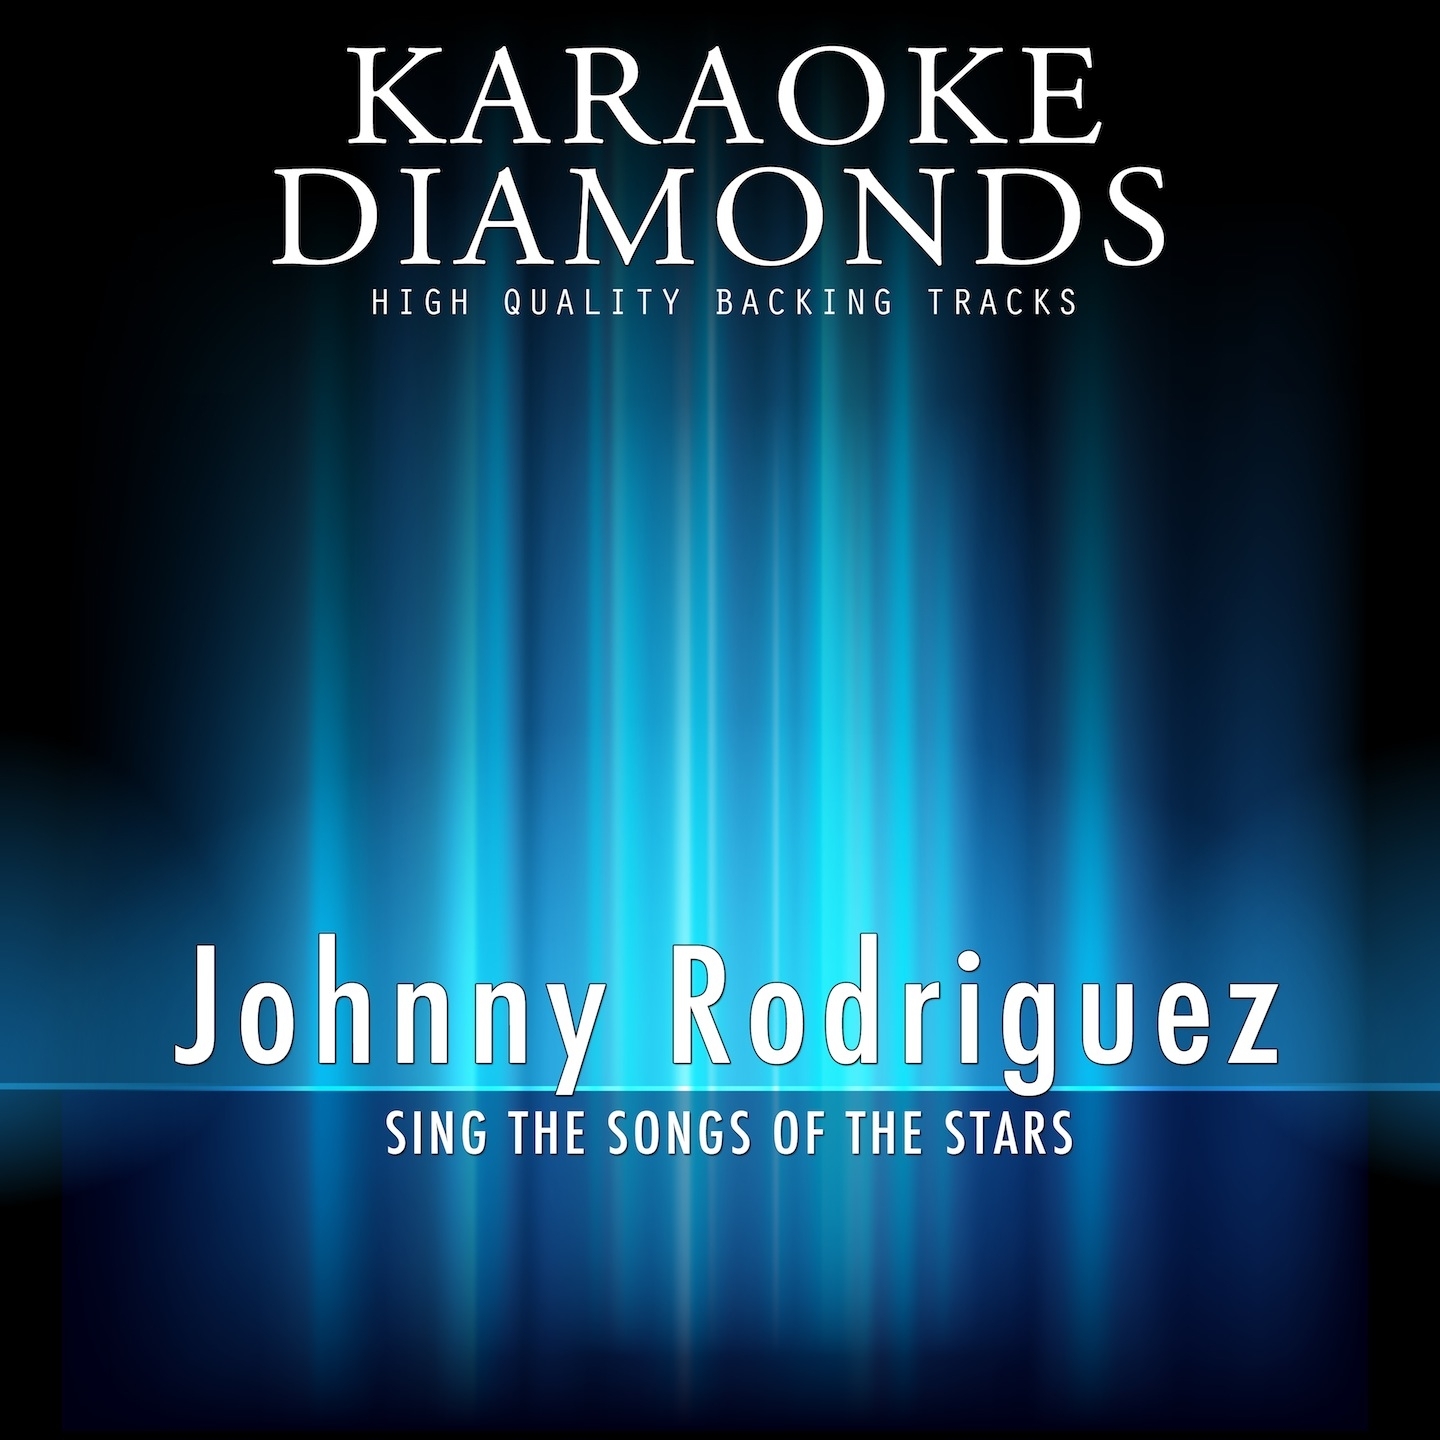 I Just Can't Get Her Out of My Mind (Karaoke Version In the Style of Johnny Rodriguez, Take 2)